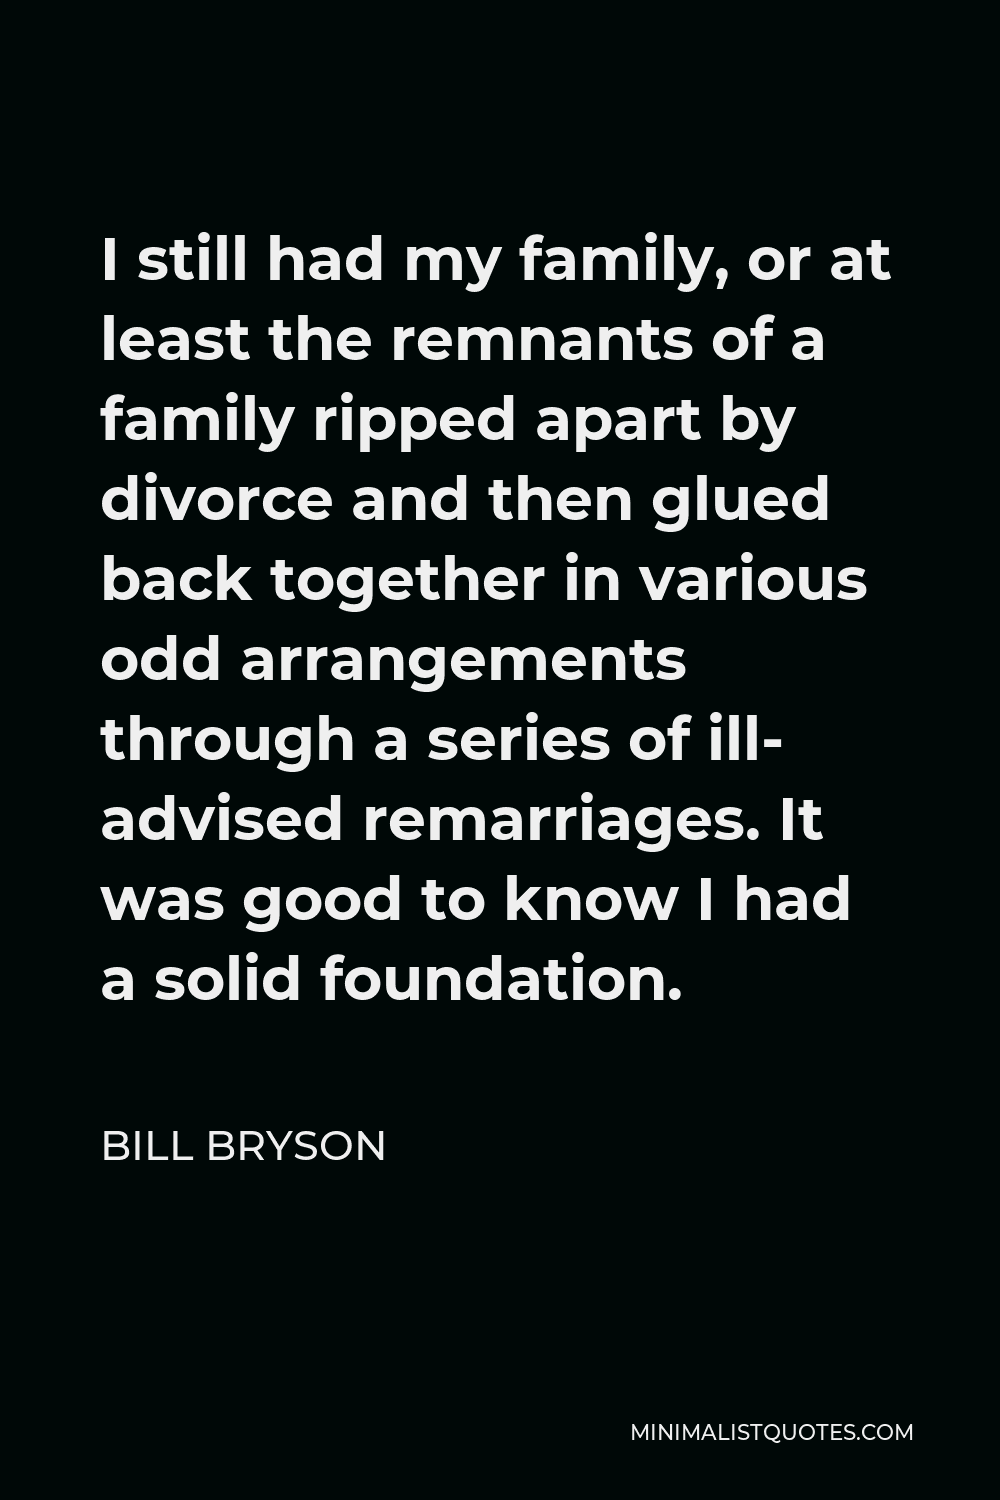 Bill Bryson Quote - I still had my family, or at least the remnants of a family ripped apart by divorce and then glued back together in various odd arrangements through a series of ill- advised remarriages. It was good to know I had a solid foundation.